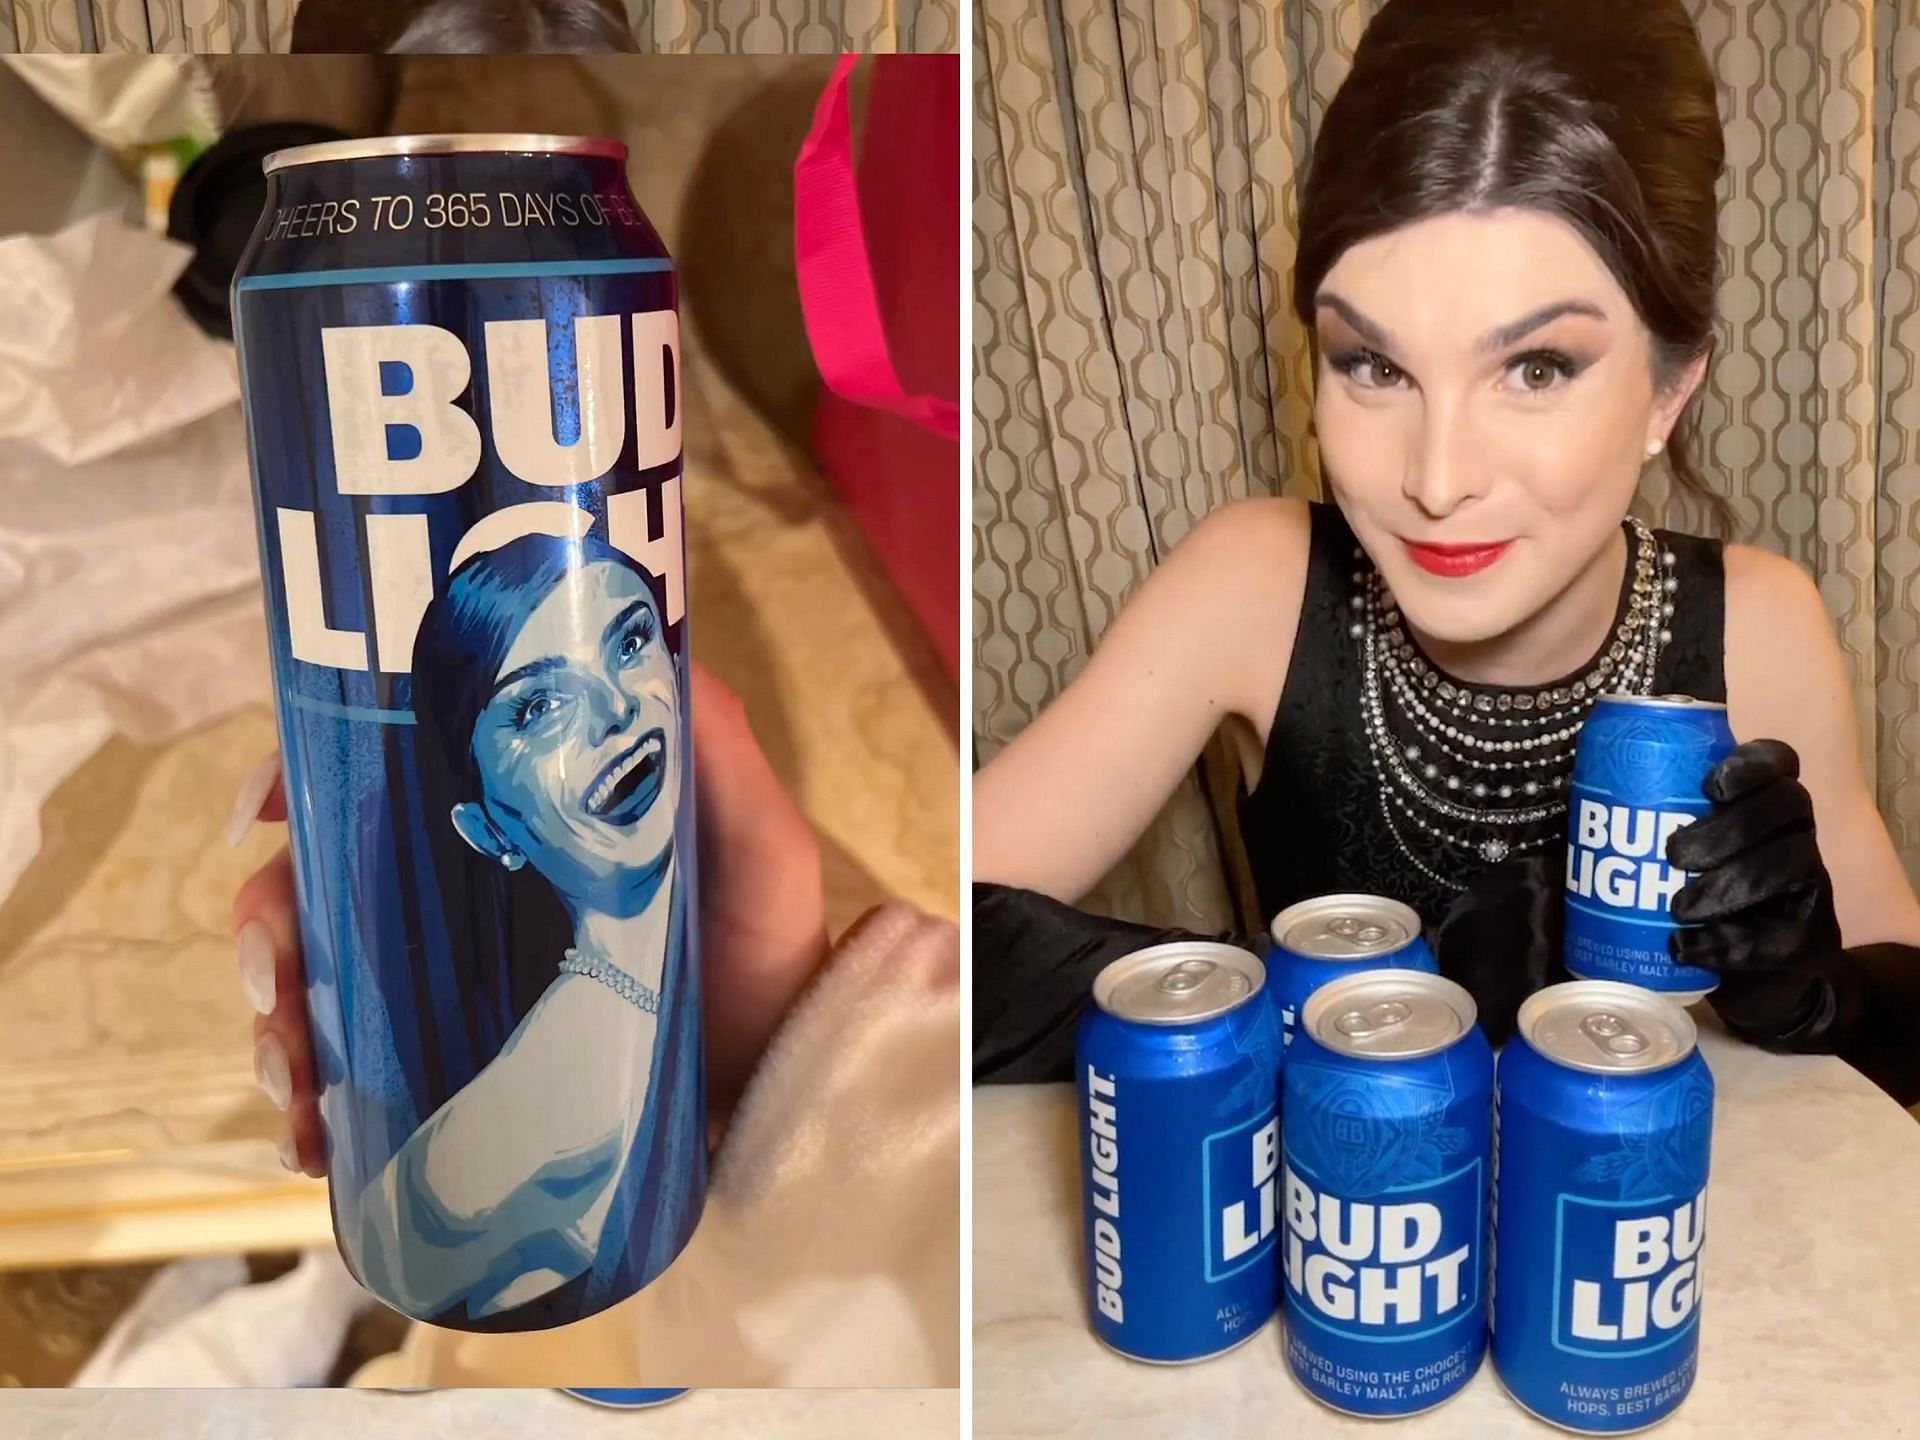 Anheuser Busch has fired its third party ad agency which was allegedly responsible for tying up with the trans influencer. (Image via TikTok)